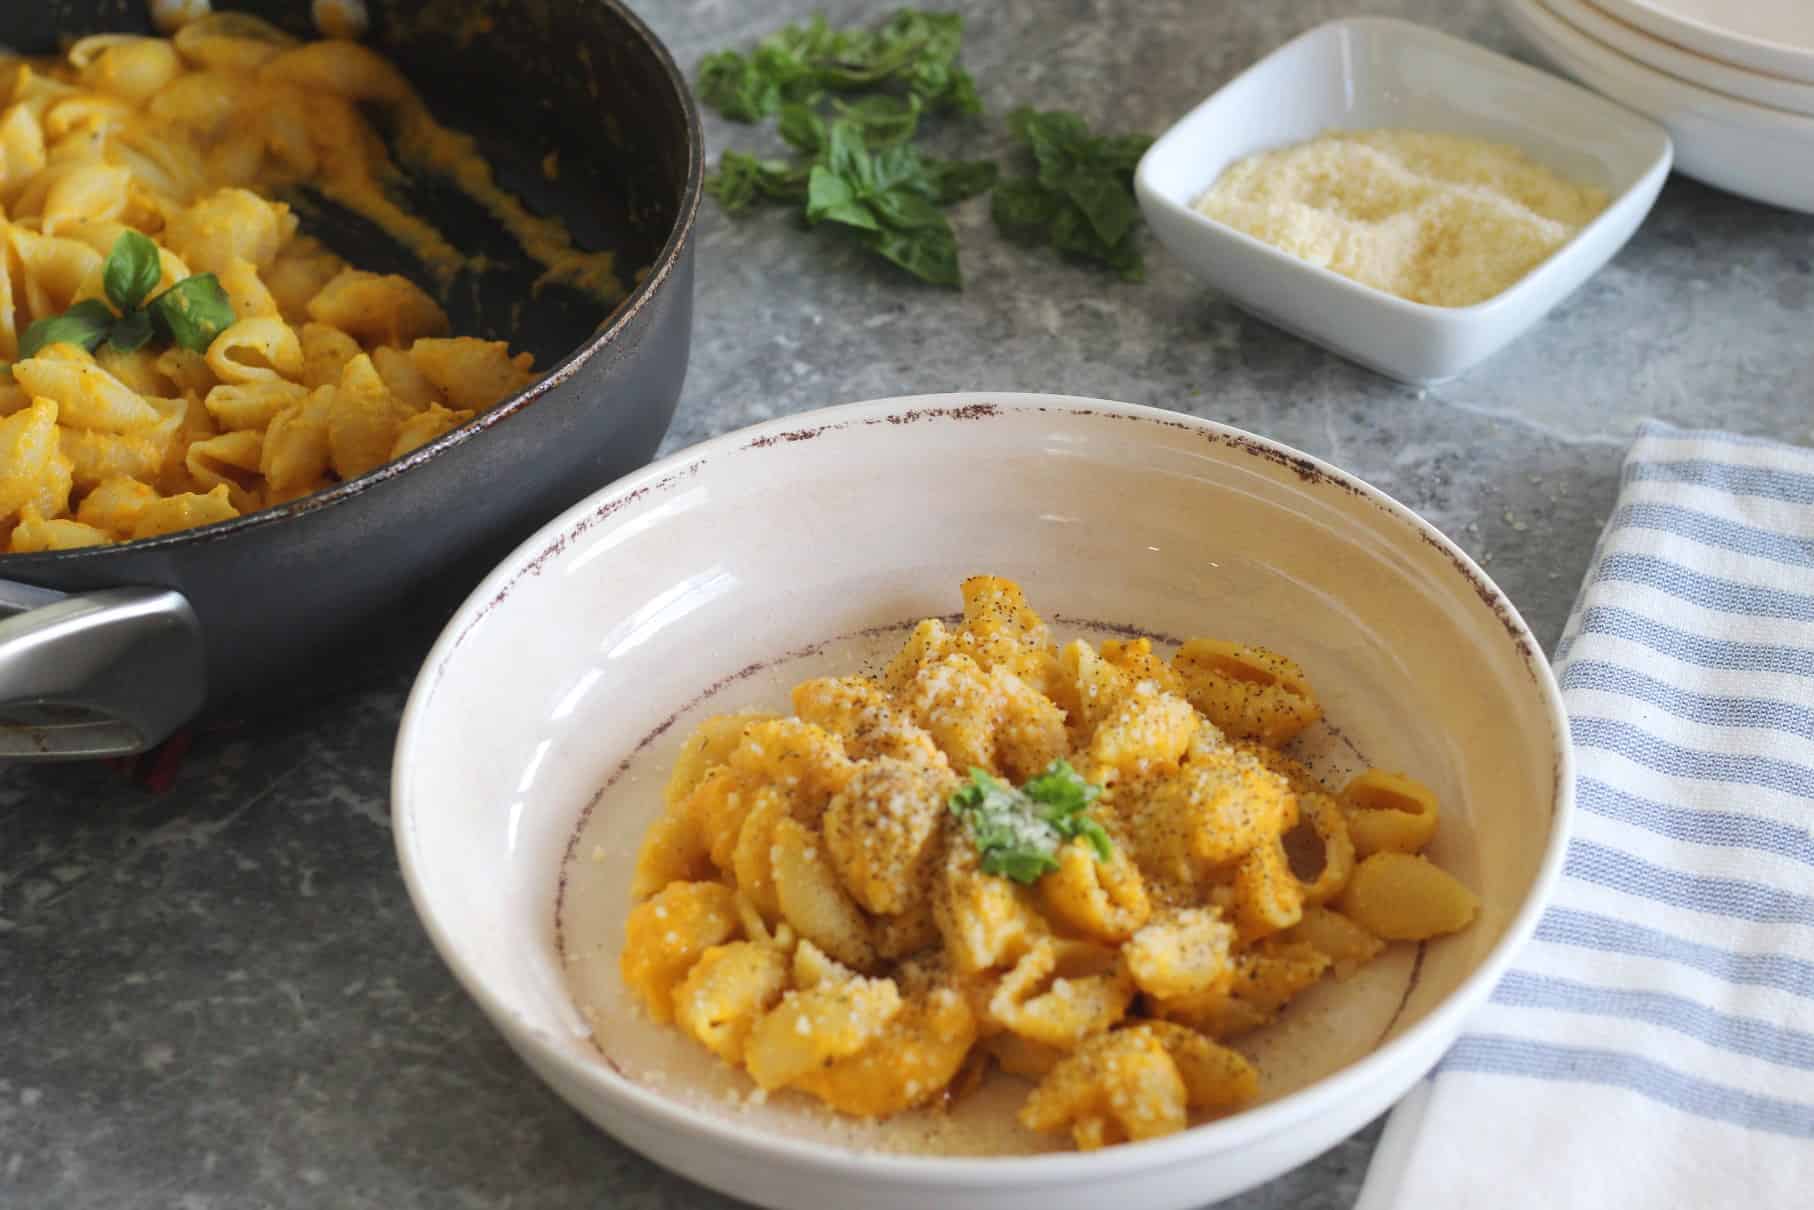 A fresh serving of shell pasta with butternut squash sauce. Pasta is served with basil and parmesan cheese, topped with black pepper.